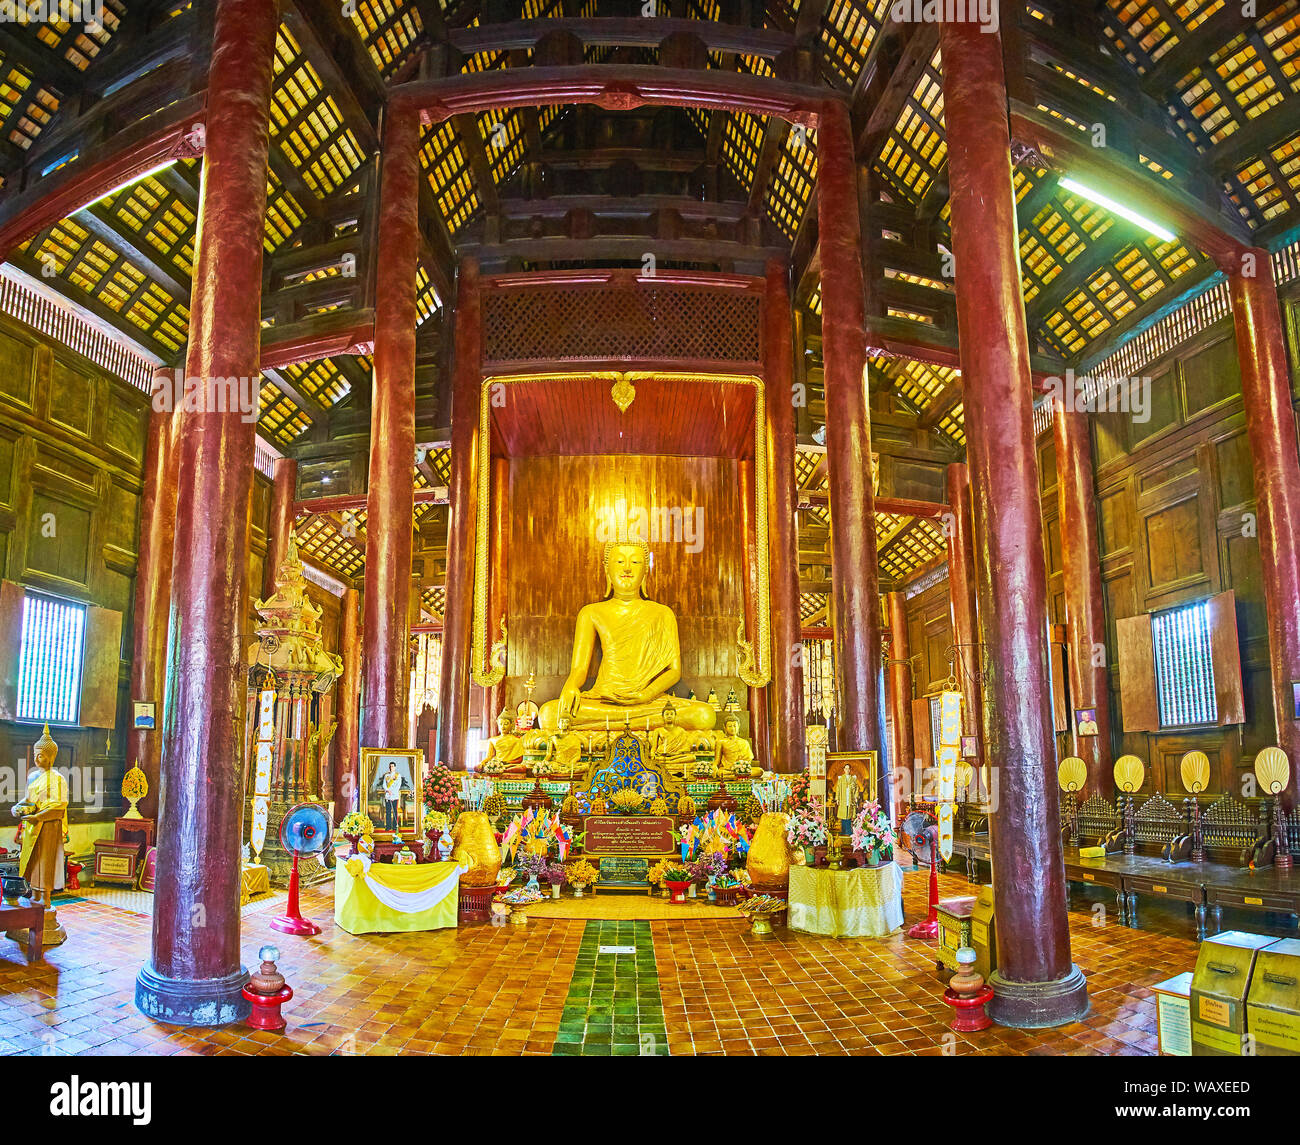 CHIANG MAI, THAILAND - MAY 2, 2019: Interior of Wat Phan Tao temple, constructed of dark teakwood with tall pillars, modest walls and ceiling, golden Stock Photo